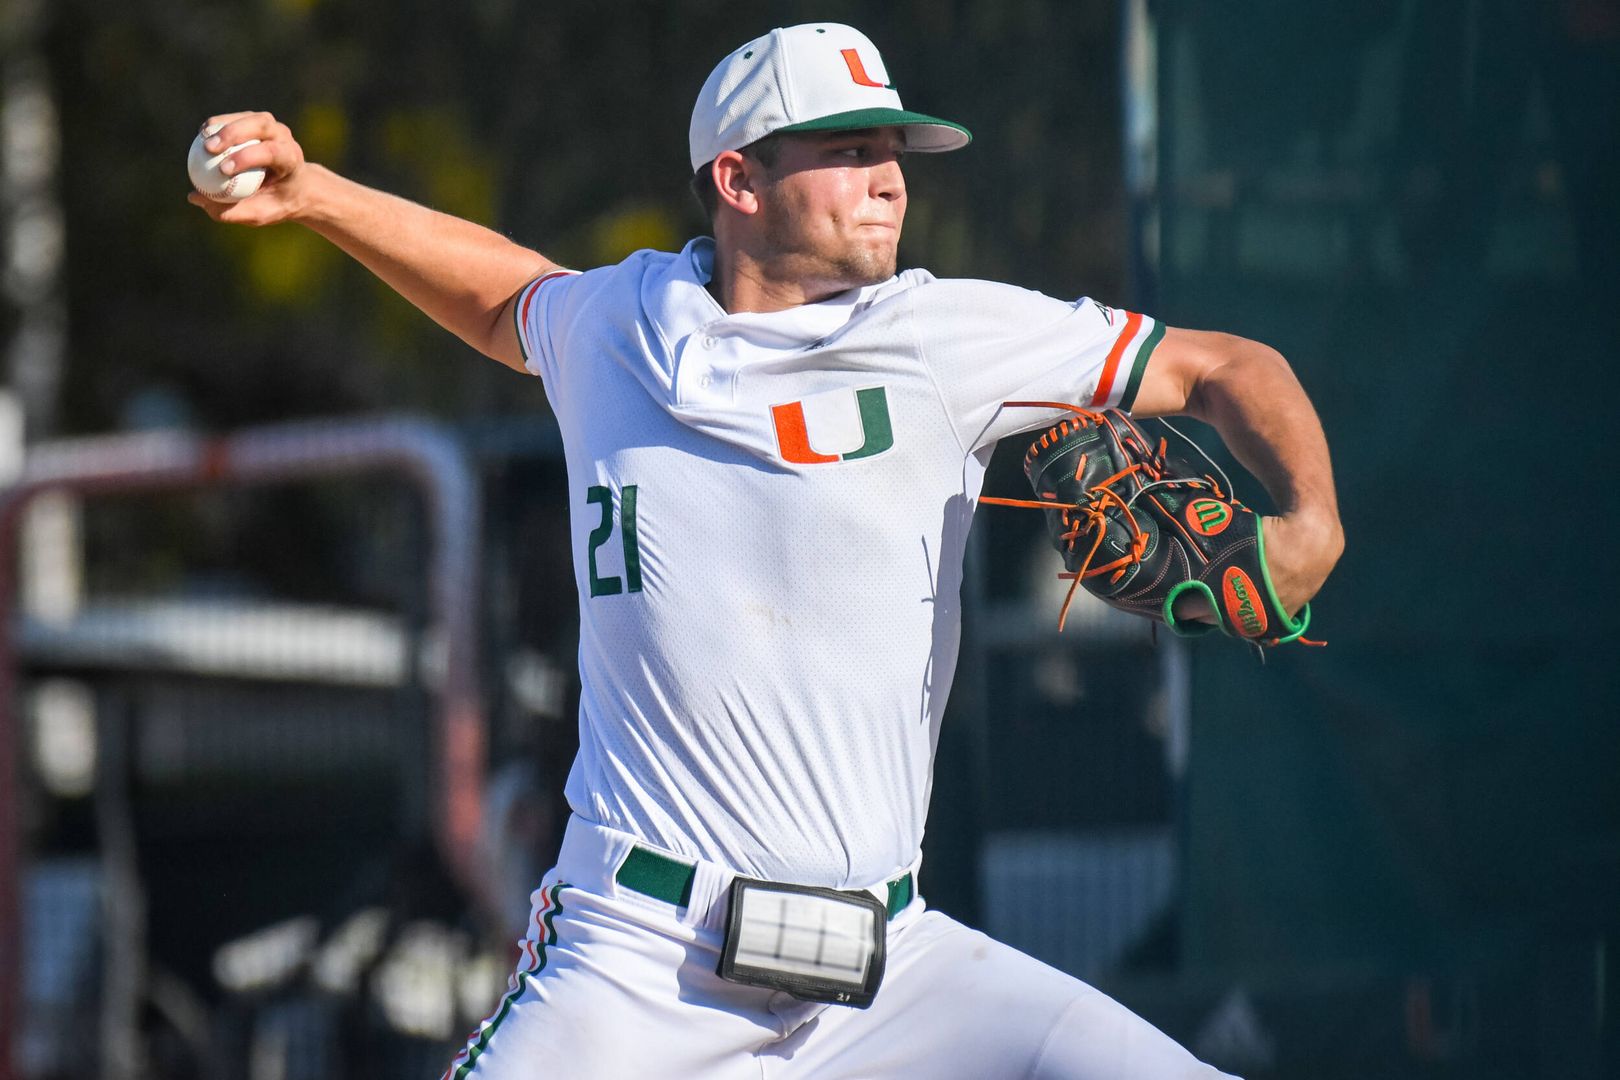 Cecconi Becomes 66th Hurricane to Reach Major Leagues